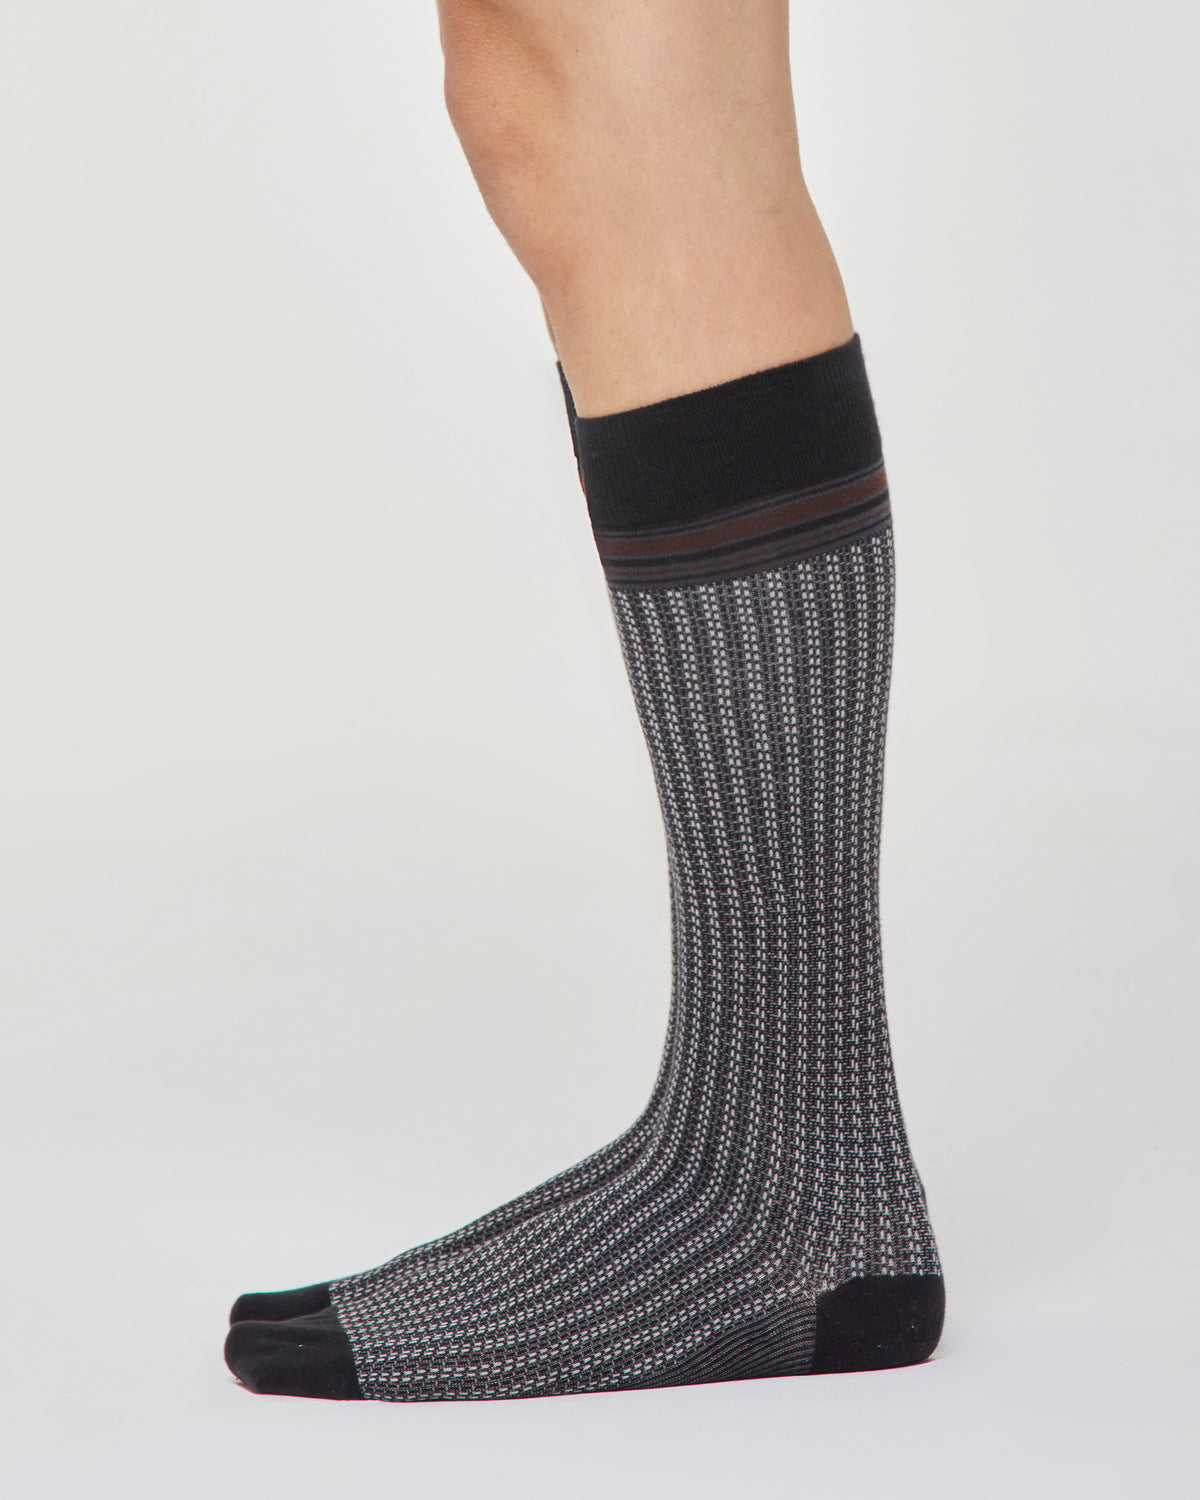 Efrem cotton long sock with tie pattern